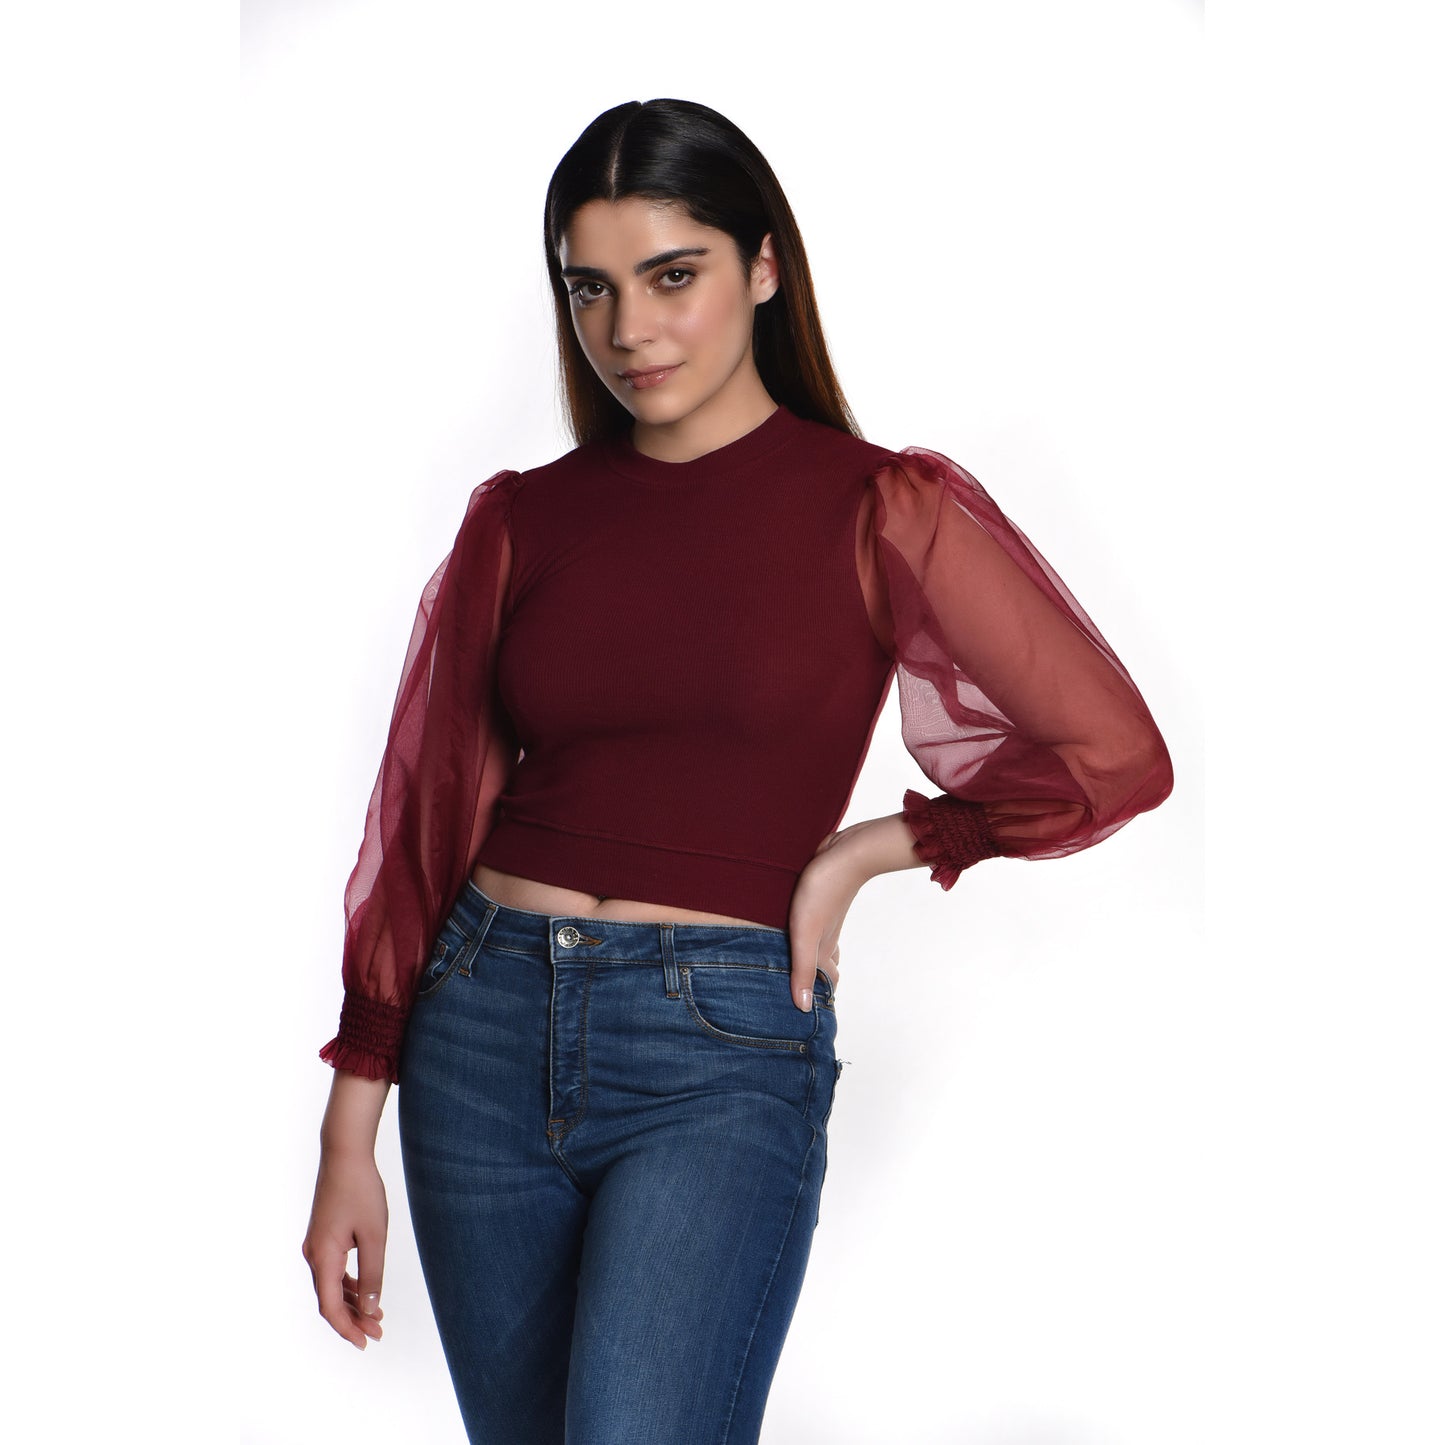 Hosiery Blouses with Puffy Organza Full Sleeves -  Maroon - Blouse featured